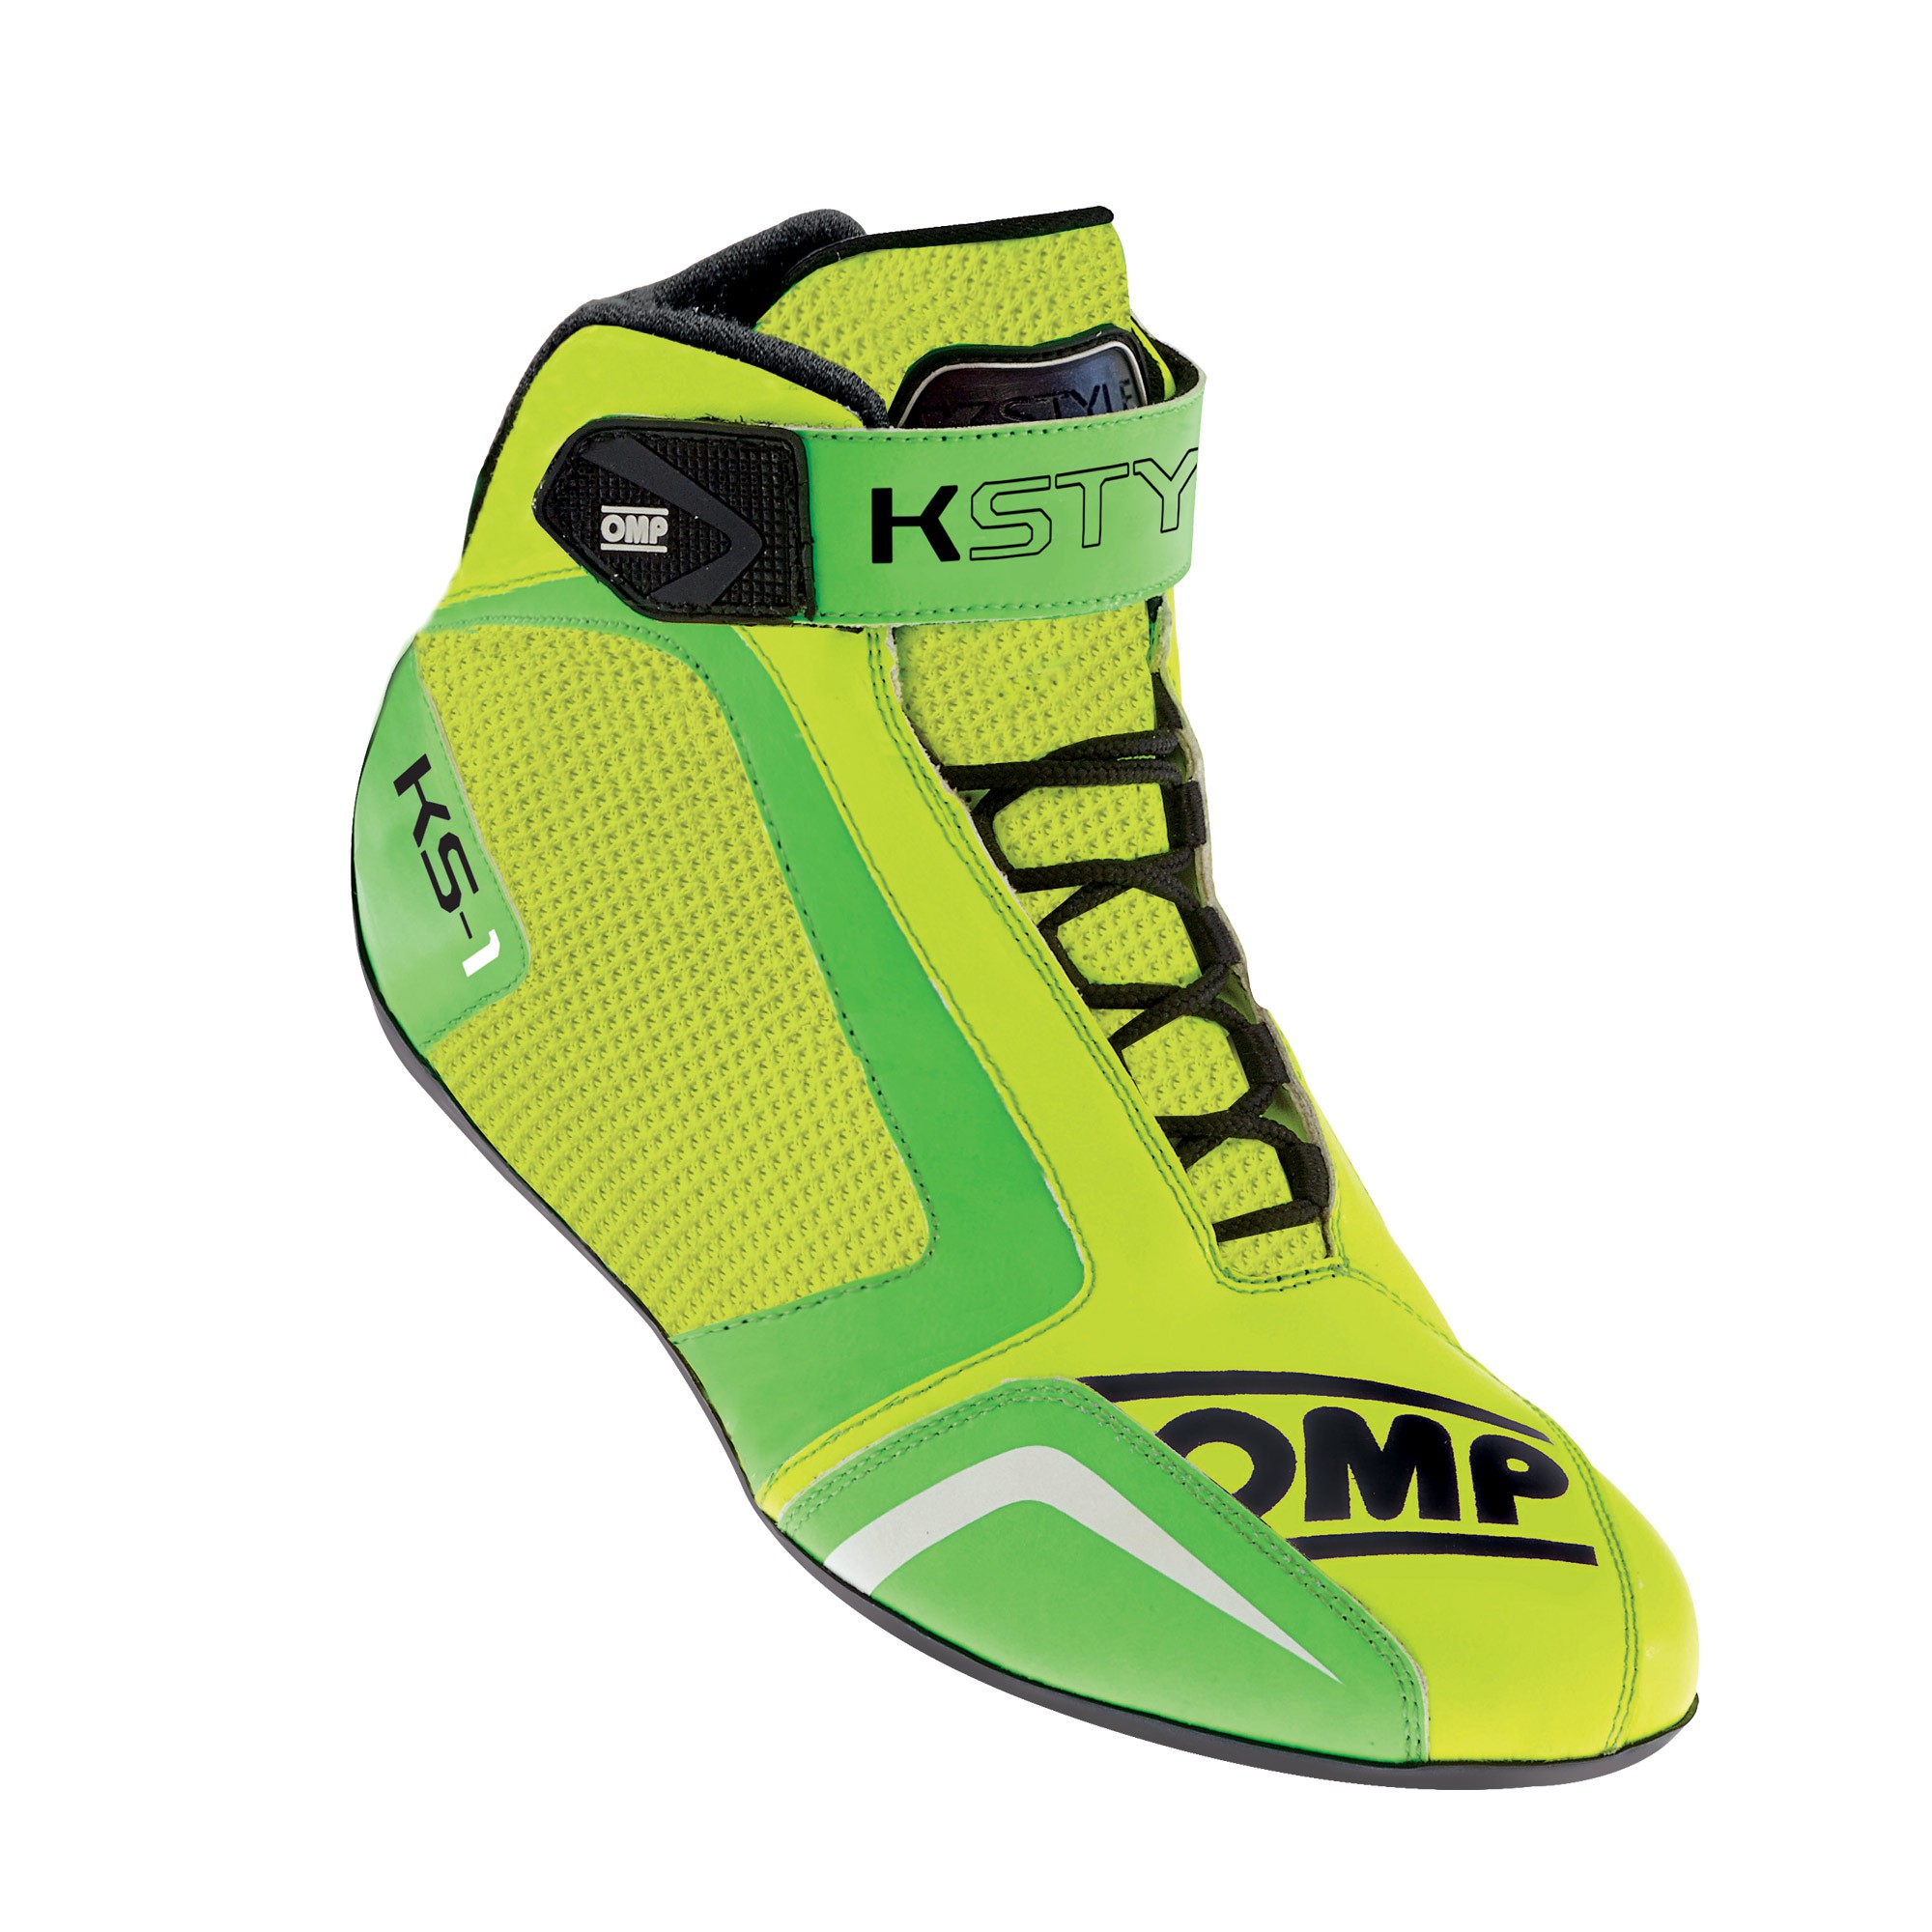 KS-1 SHOES YELLOW/GREEN SIZE 32